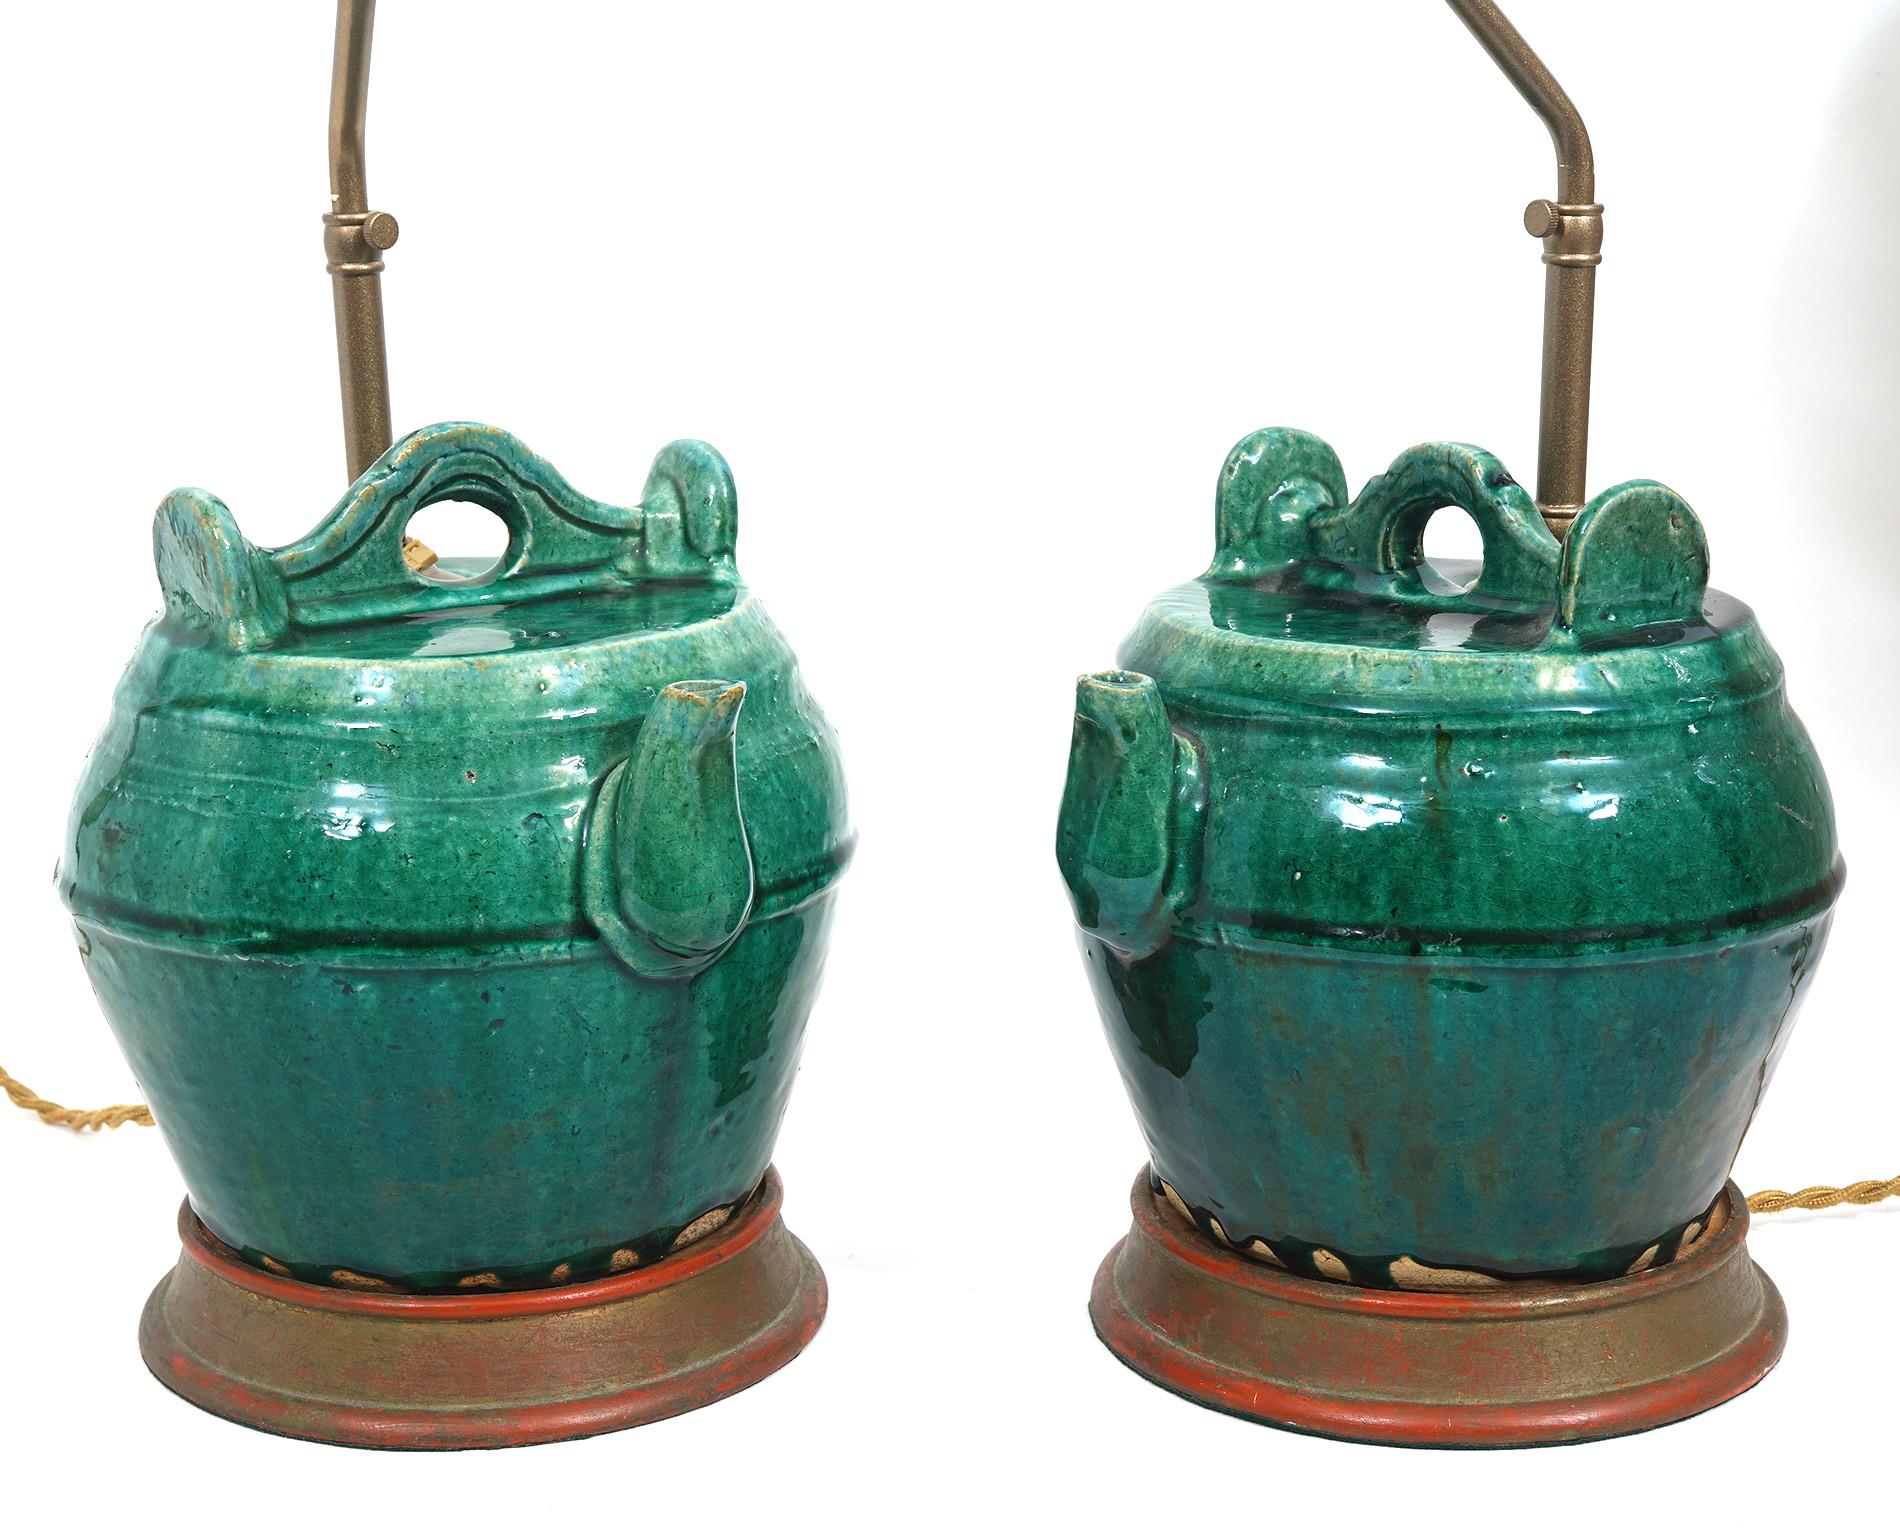 Pair of Antique Chinese Ceramic Jars Mounted as Table Lamps In Excellent Condition For Sale In Ft. Lauderdale, FL